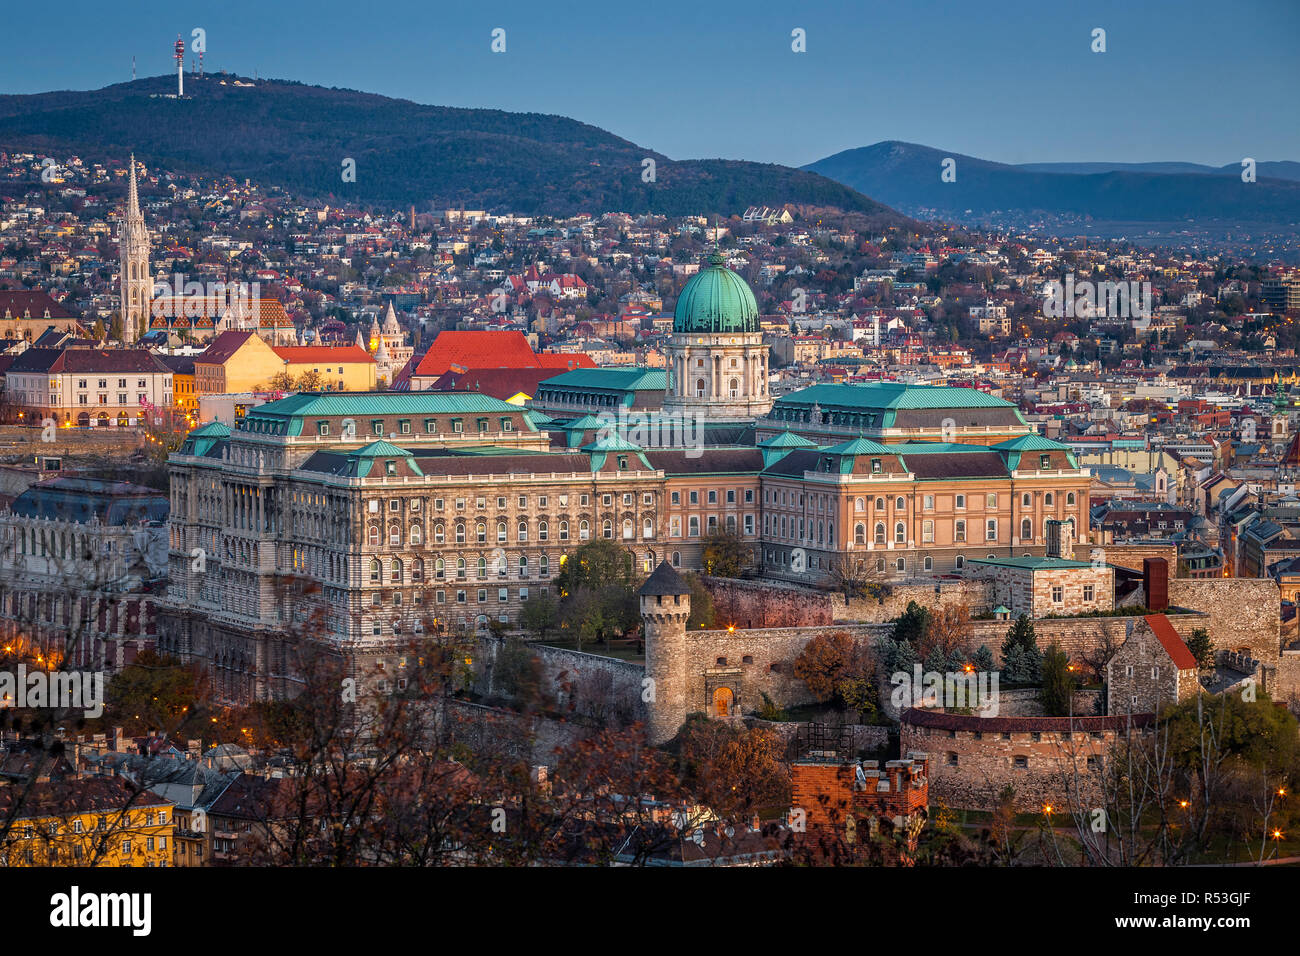 Budapest, Hungary - Aerial view of the beautiful Buda Castle Royal palace and Matthias Church in Buda district at dawn Stock Photo